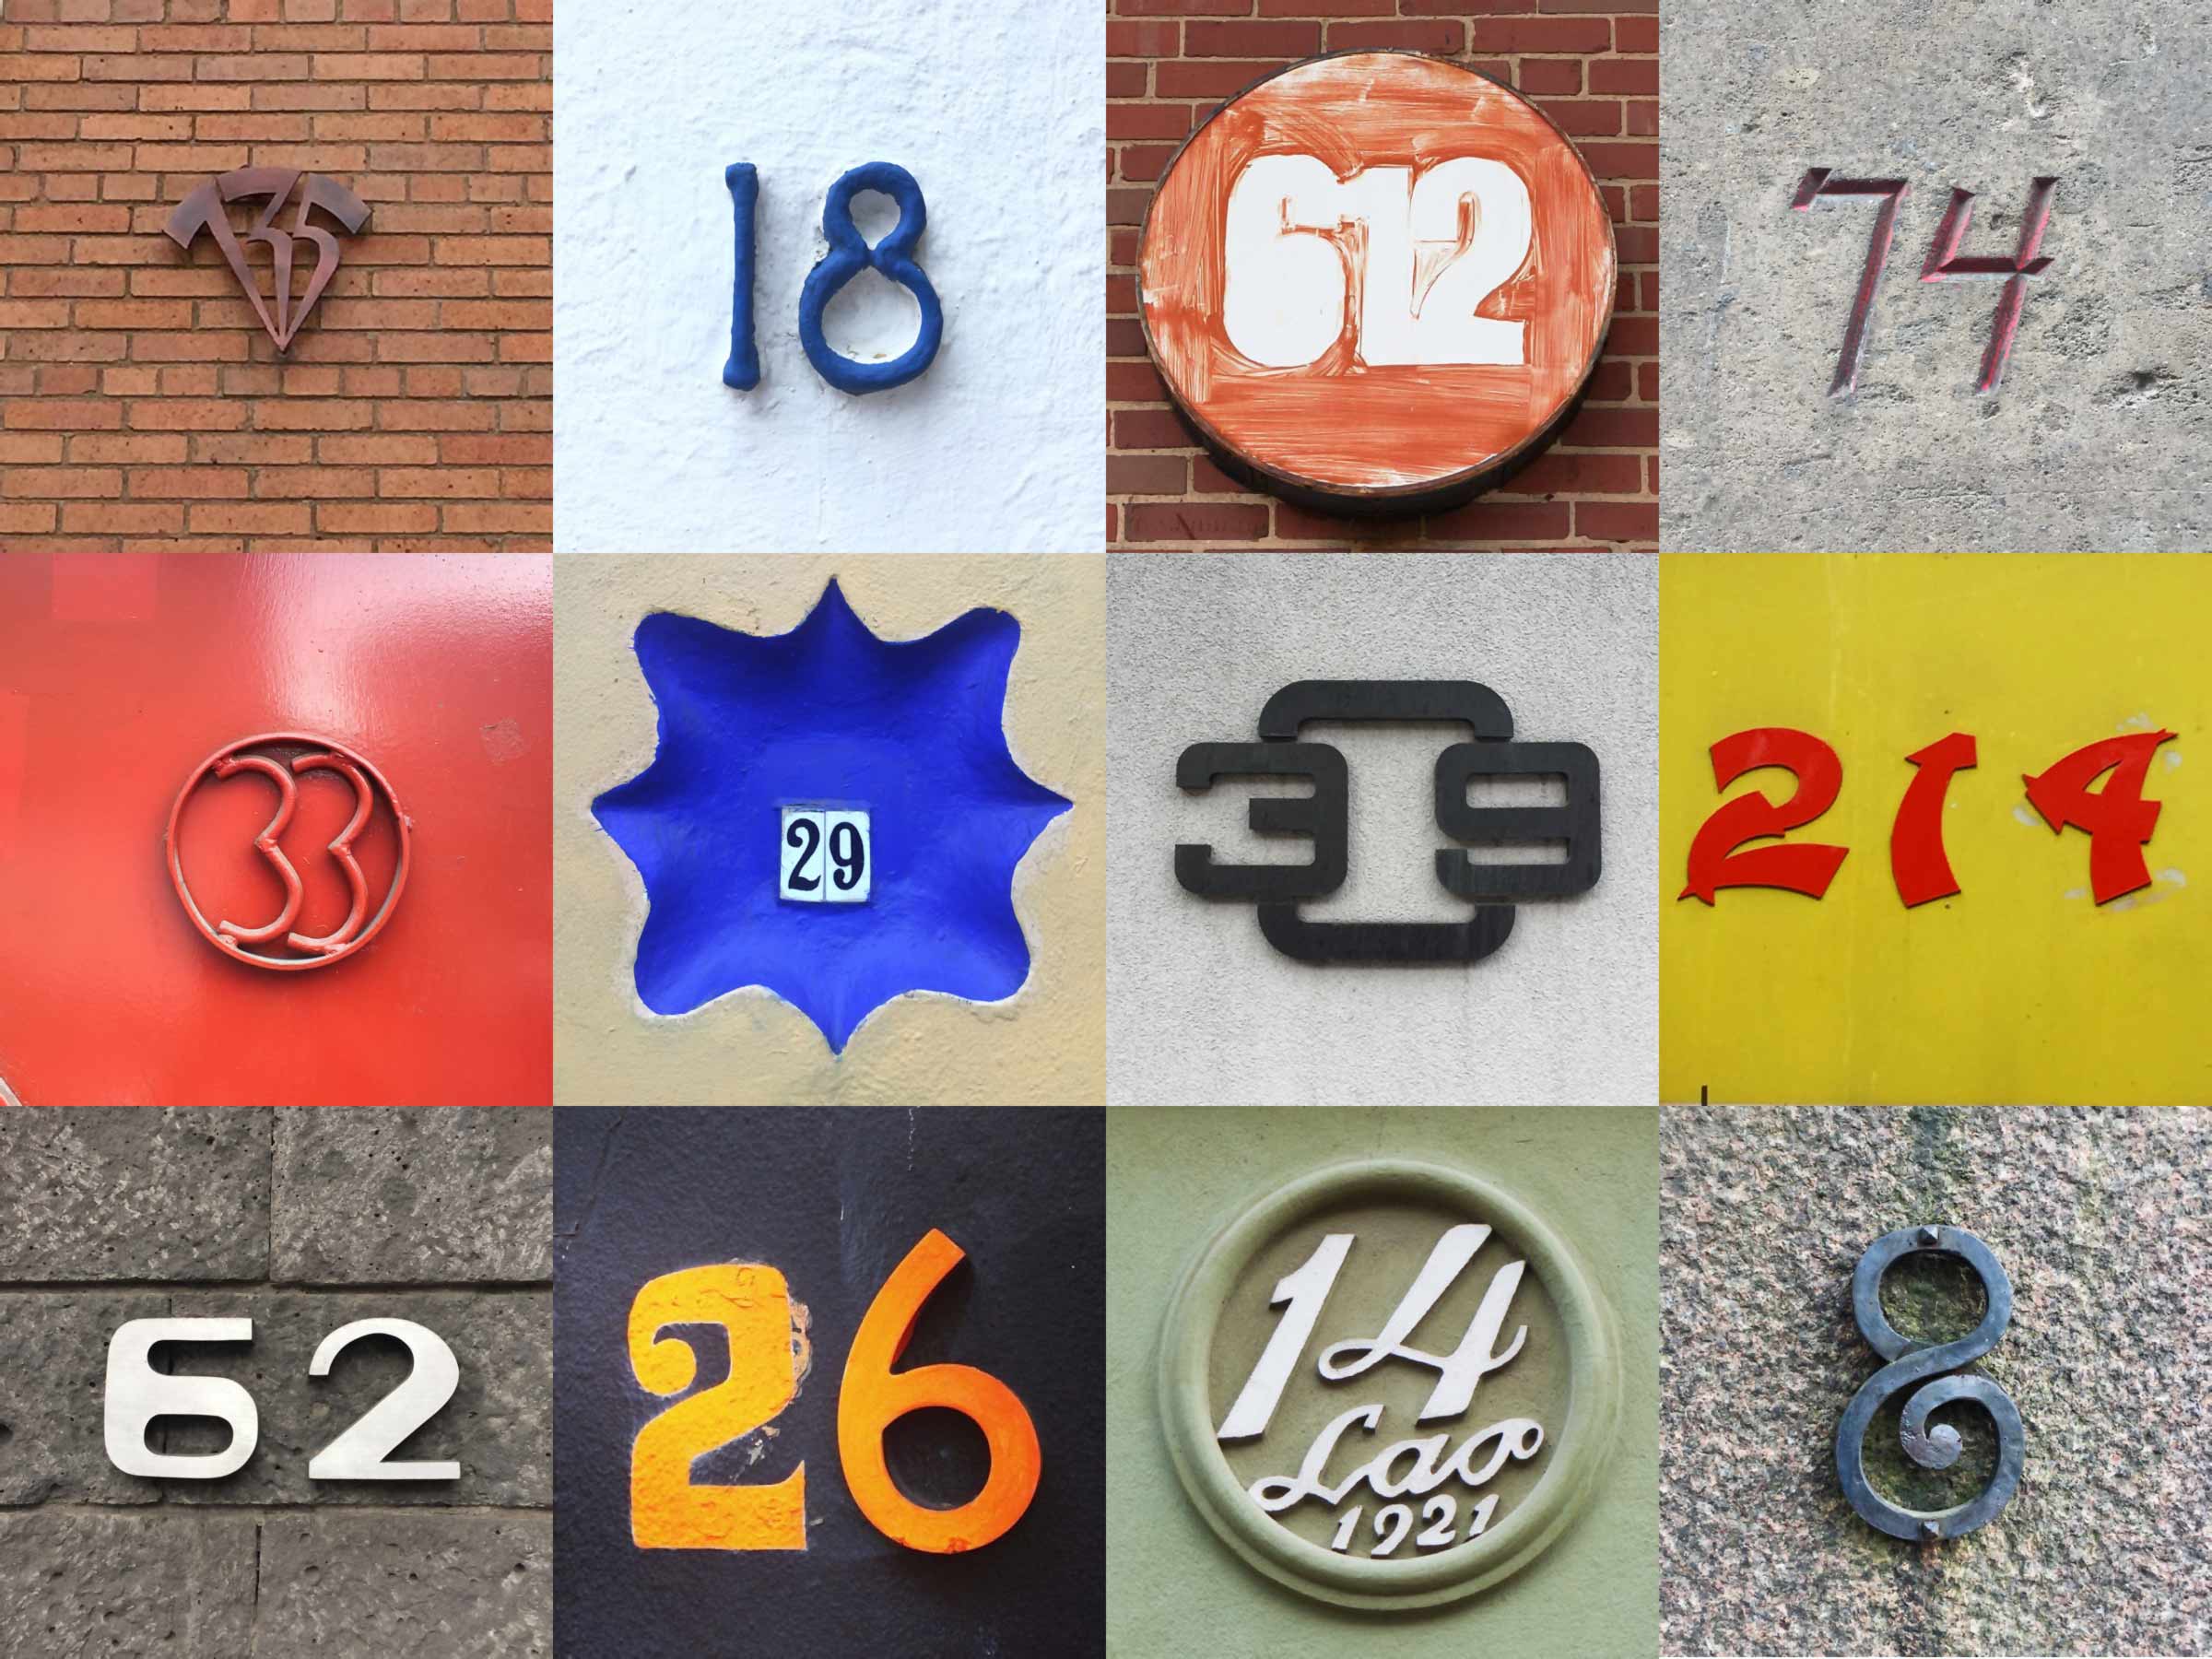 Street Numeral, creative building numbers, numerals, and numeric wayfinding signage